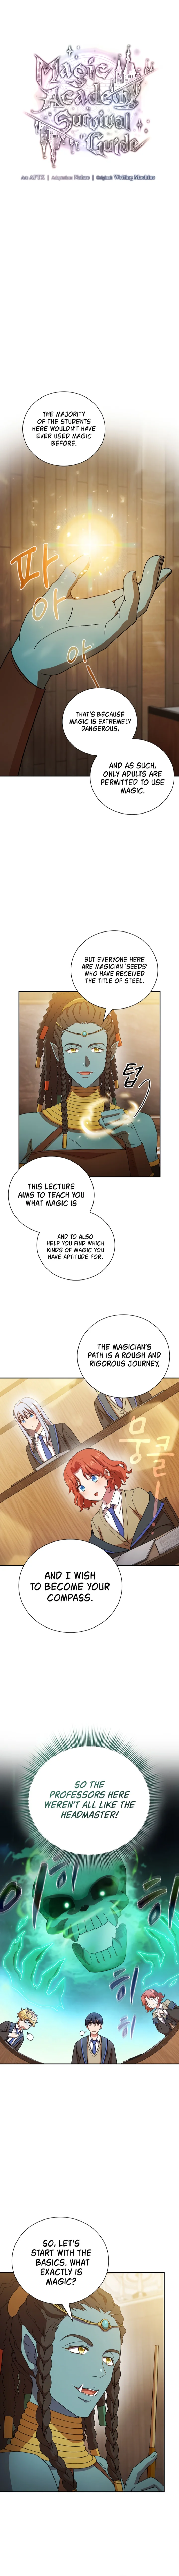 Magic Academy Survival Guide - Chapter 5 Page 2